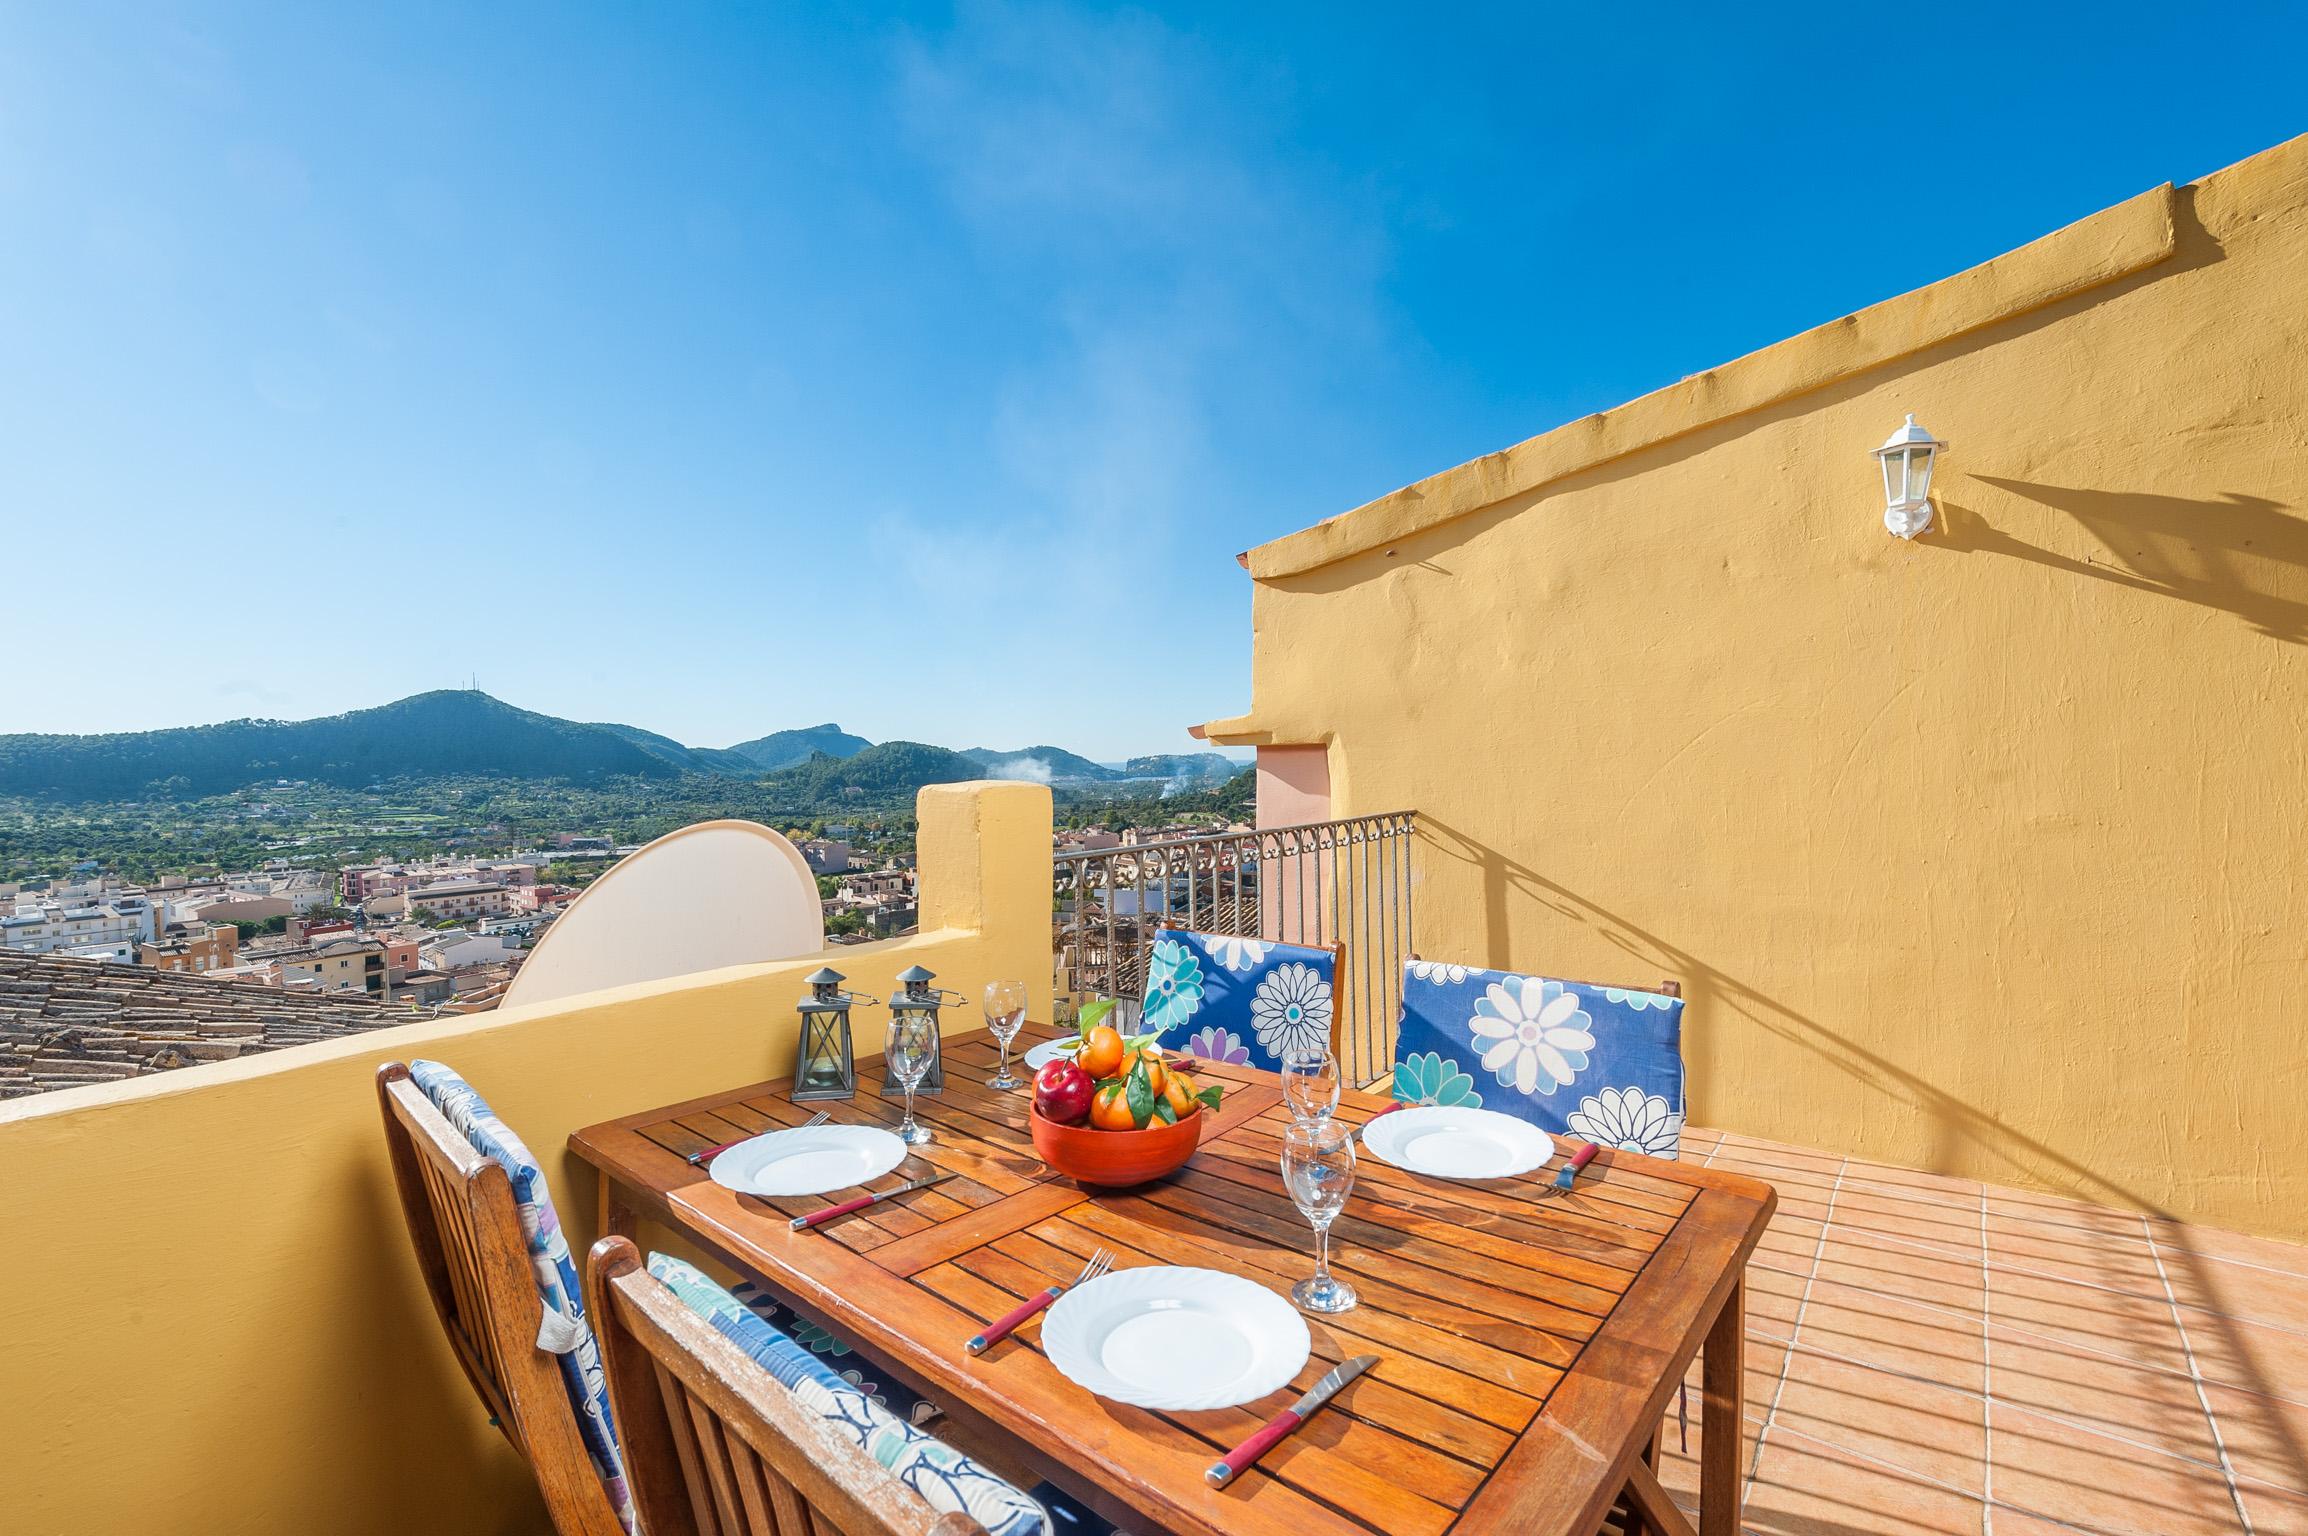 Property Image 1 - ELIAS NEIL HOUSE - Wonderful townhouse with spectacular views from the terrace. Free WiFi